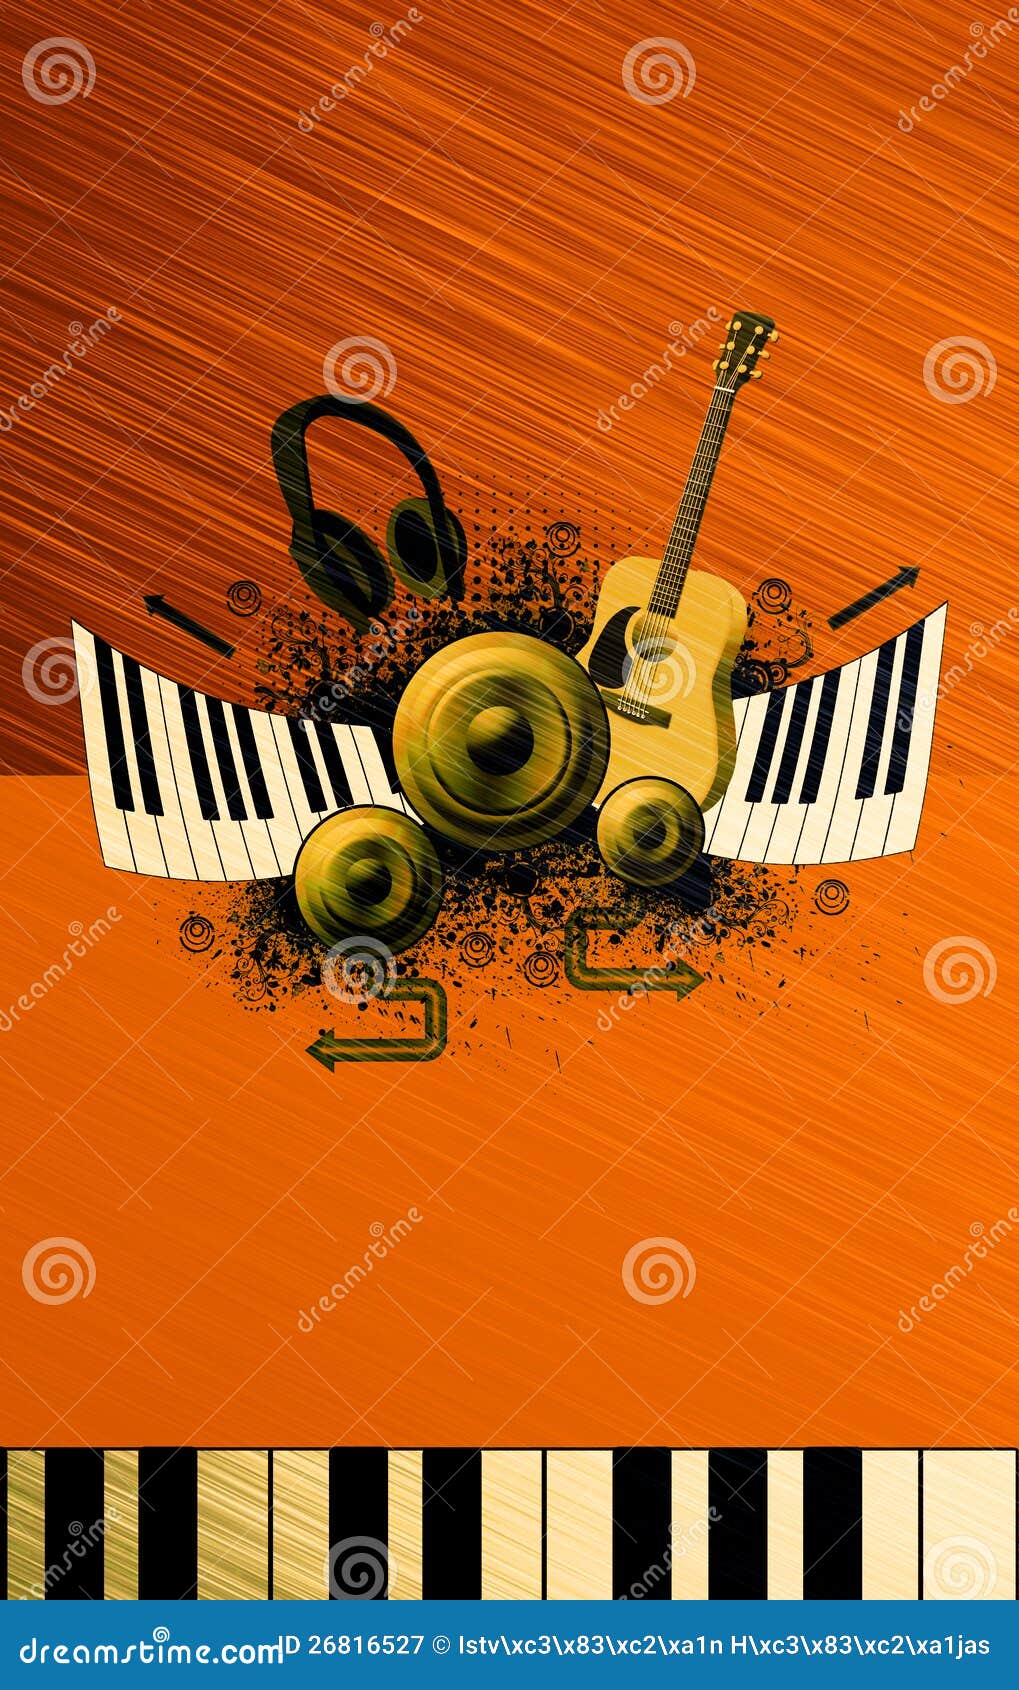 music poster clipart - photo #15